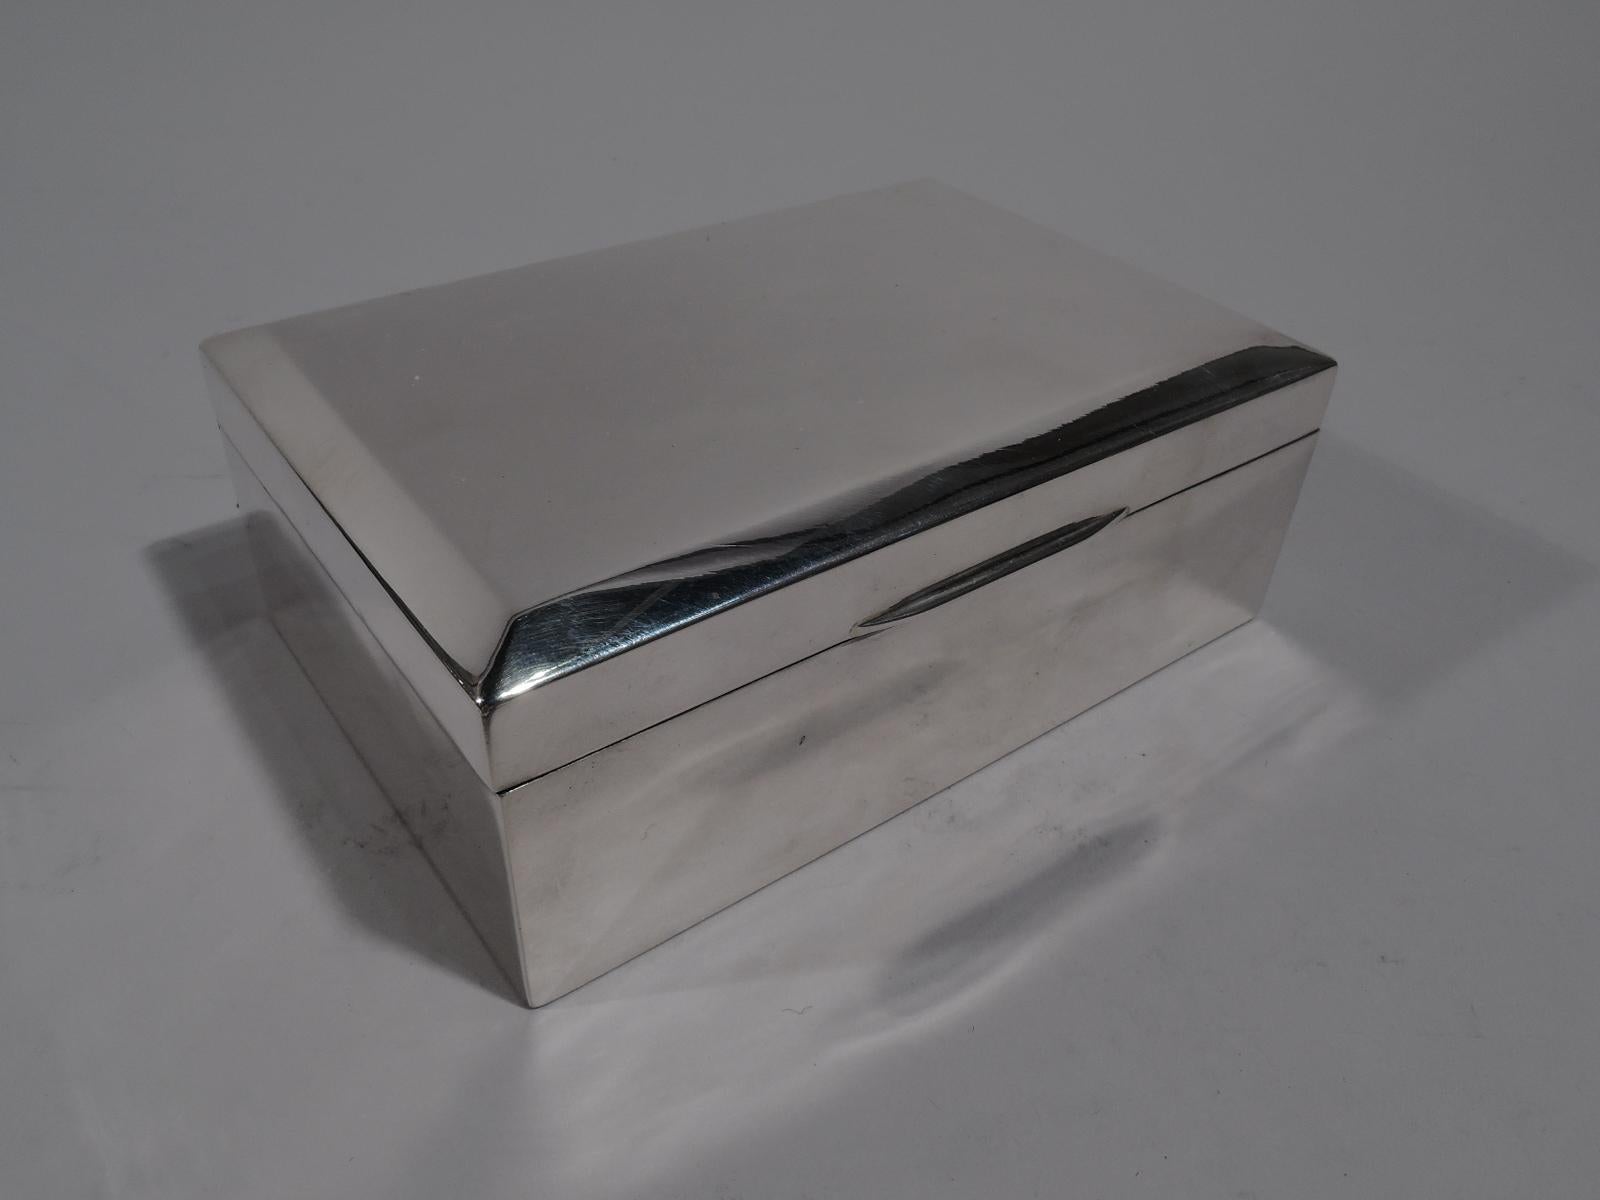 George V sterling silver box. Made by Henry James Cooper & Co., Ltd in Birmingham in 1926. Rectangular with straight sides. Cover hinged and tabbed with flat and canted top. Box and cover interior cedar lined and partitioned. Underside leather